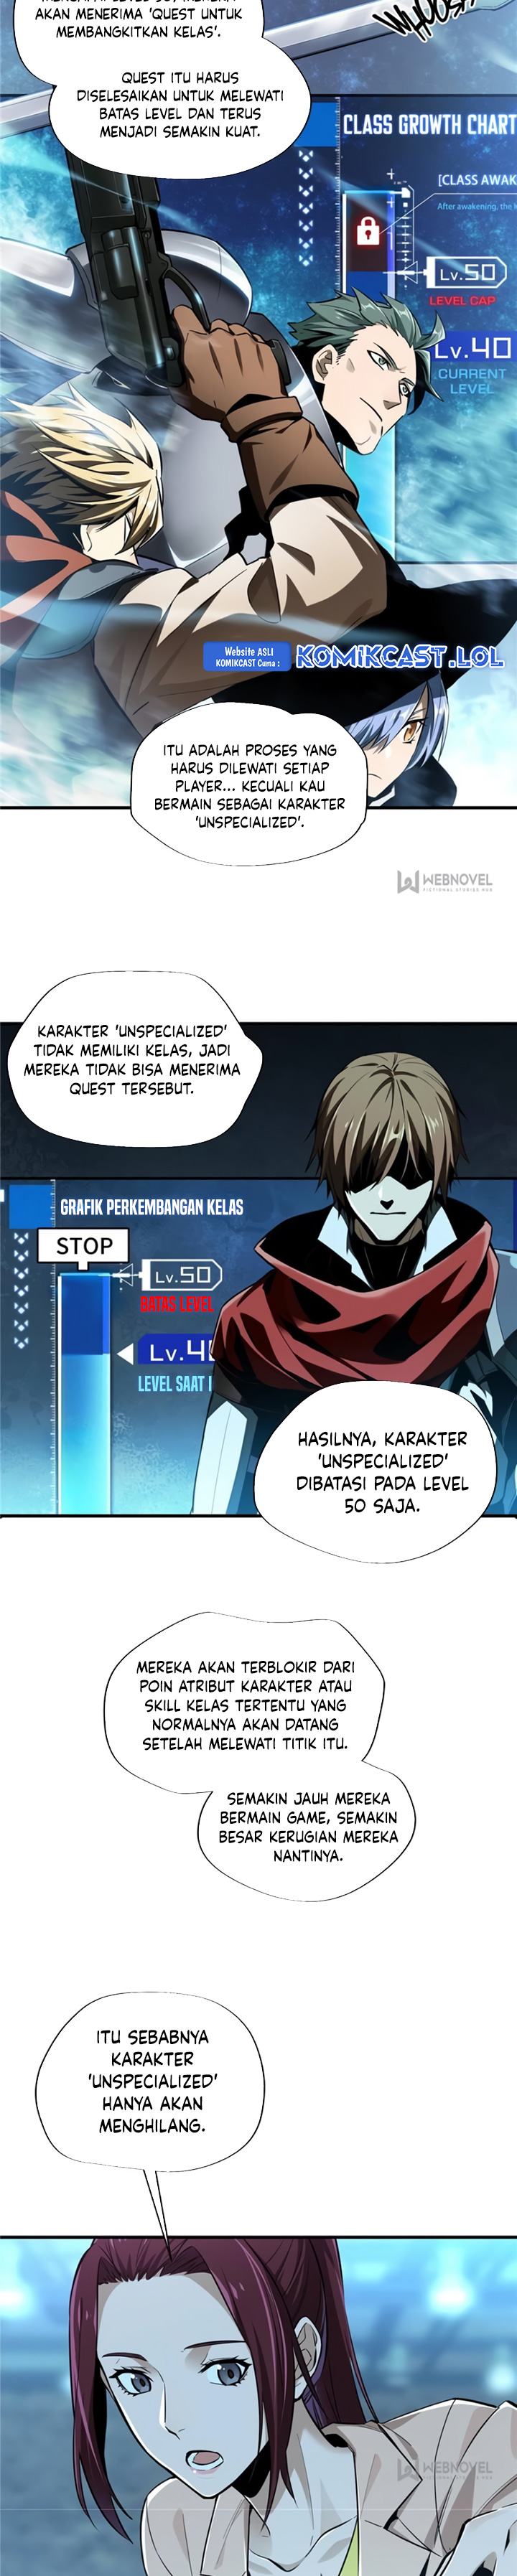 The King’s Avatar (2020) Chapter 31